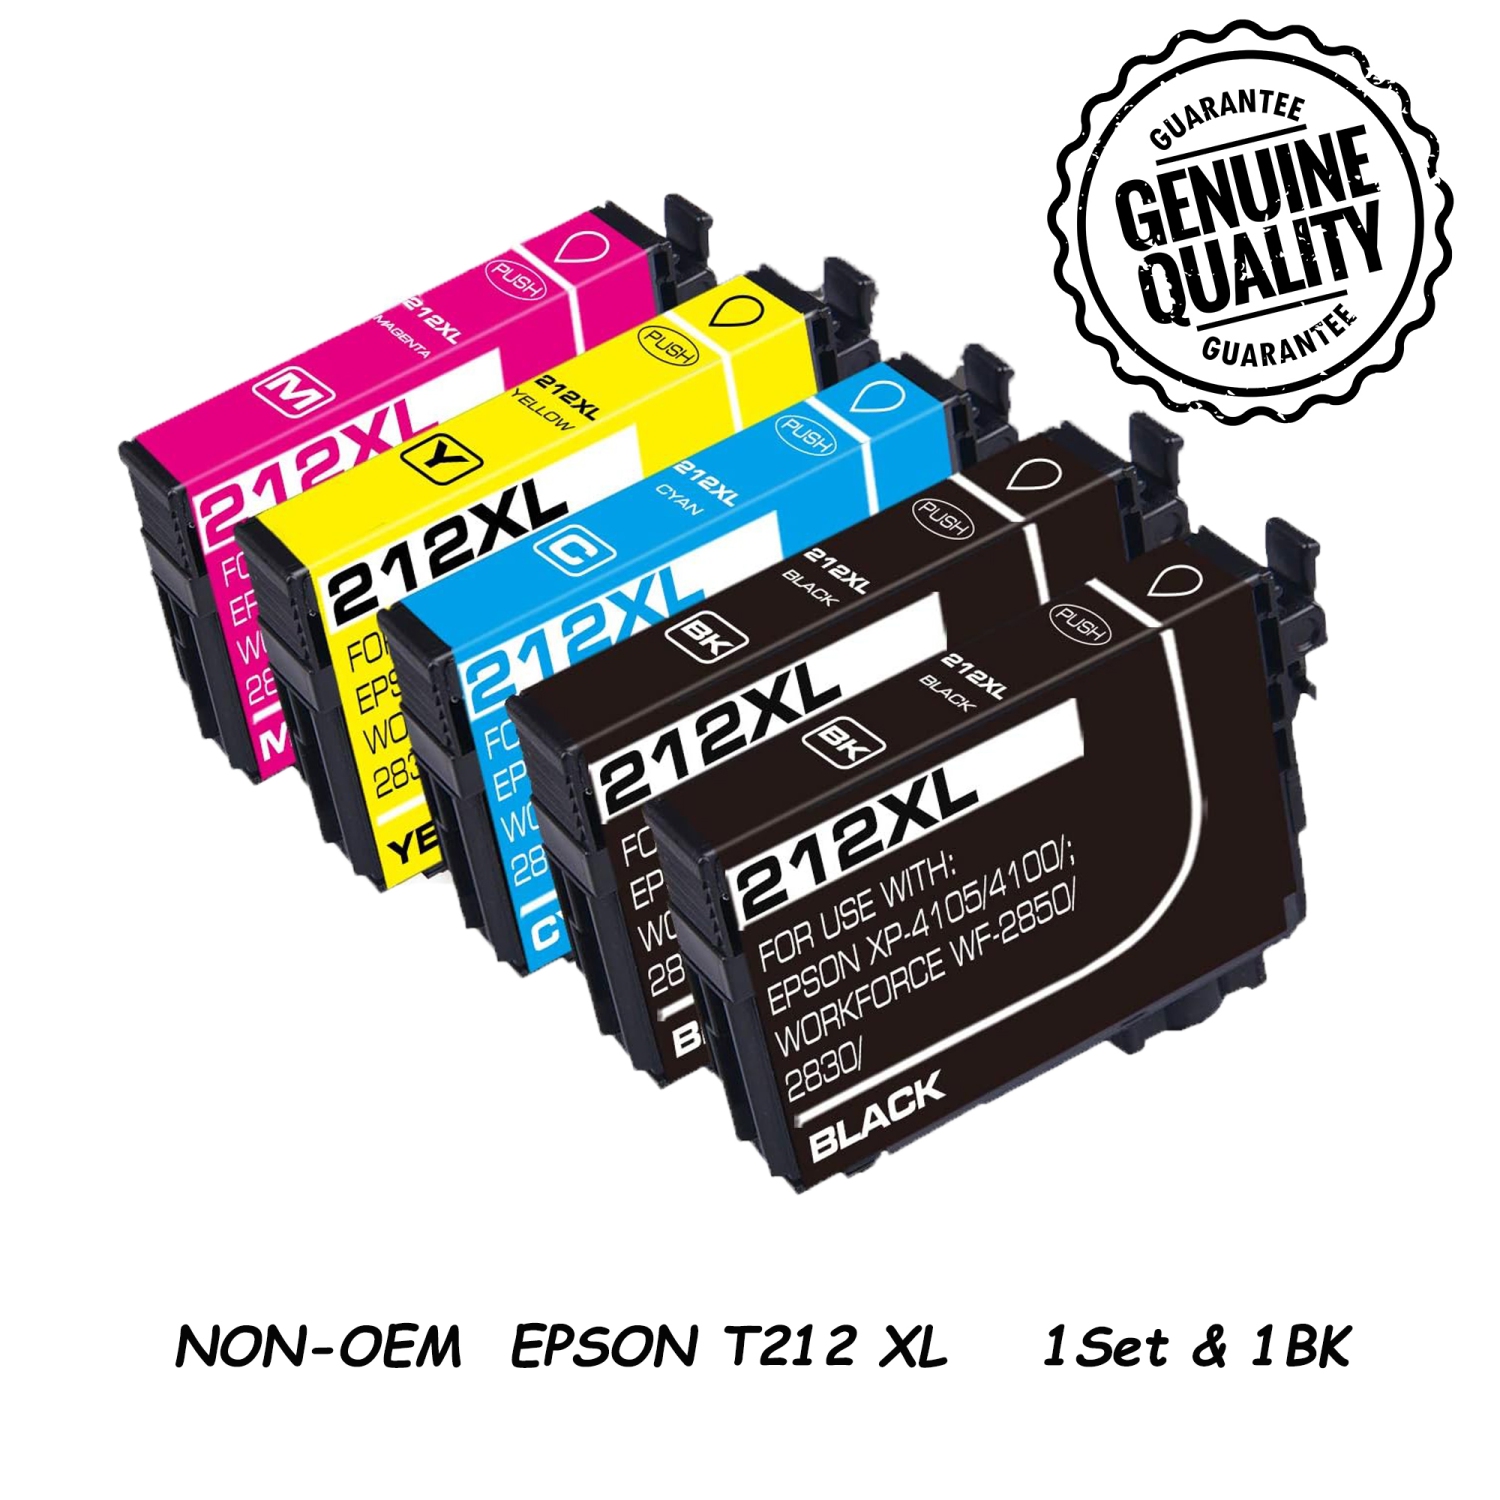 [New Chip] 1Set & 1BK Compatible Ink Cartridge Replacement for Epson T212 212 XL to use with Expression Home XP-4100 , EpsonWorkForce WF-2830 , WorkForce WF-2850